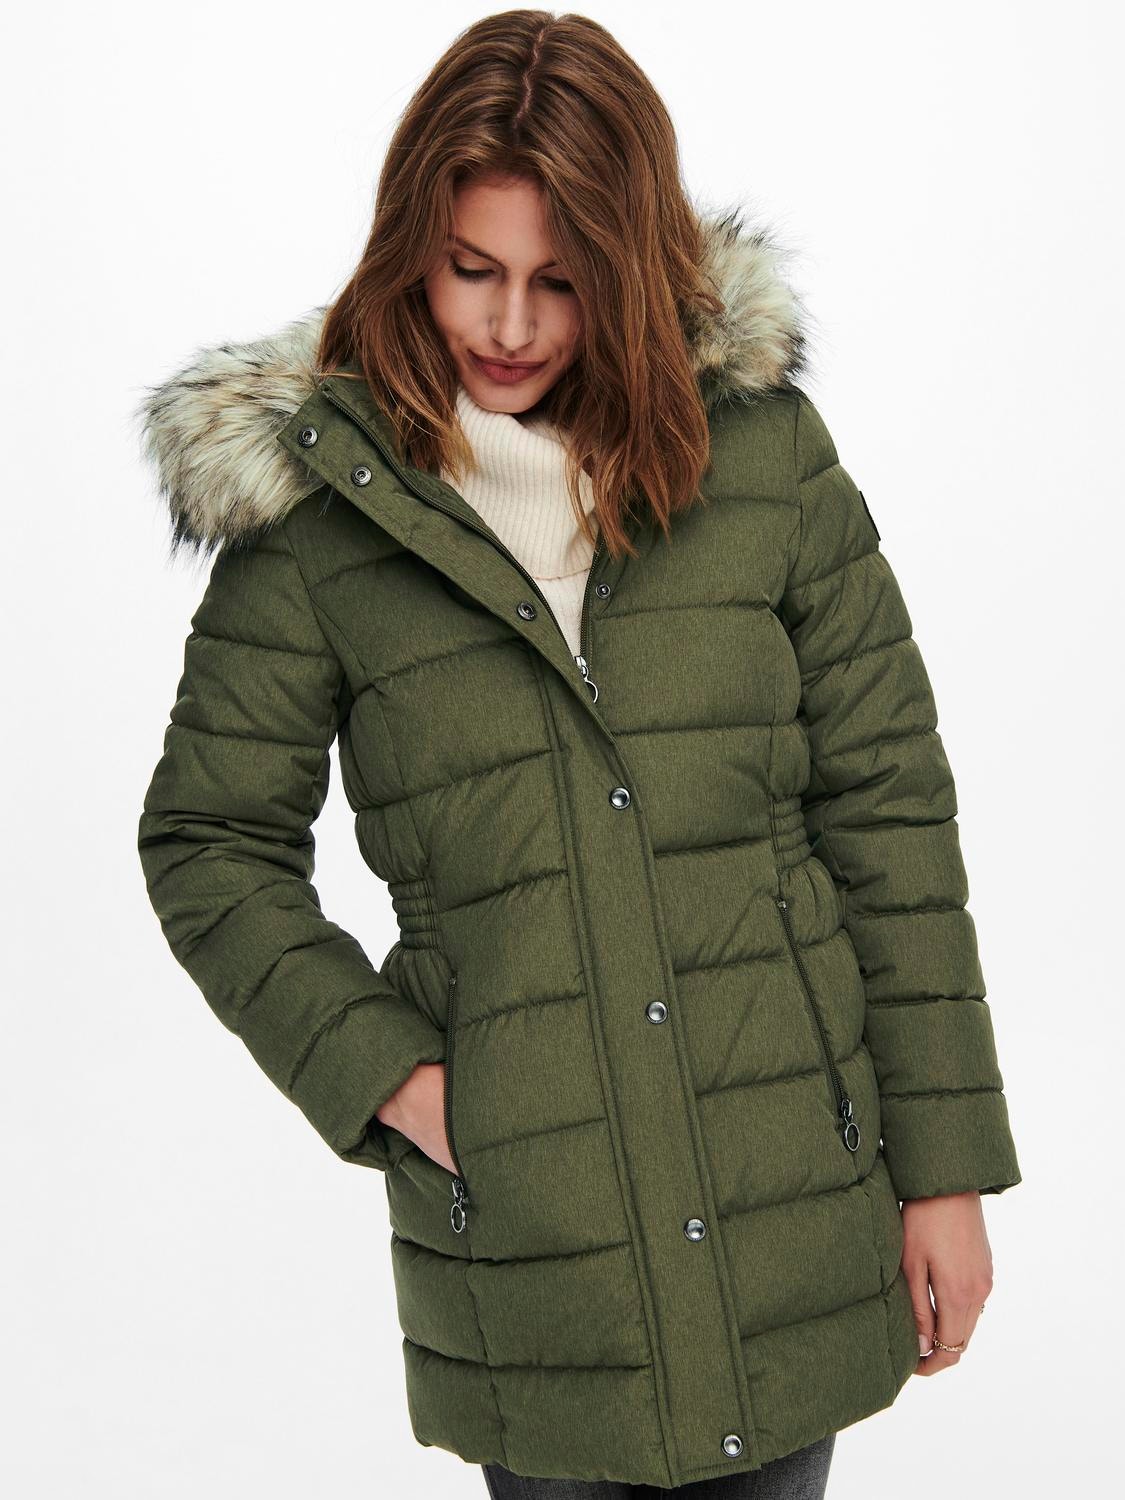 ONLY Long Quilted jacket -Kalamata - 15205636